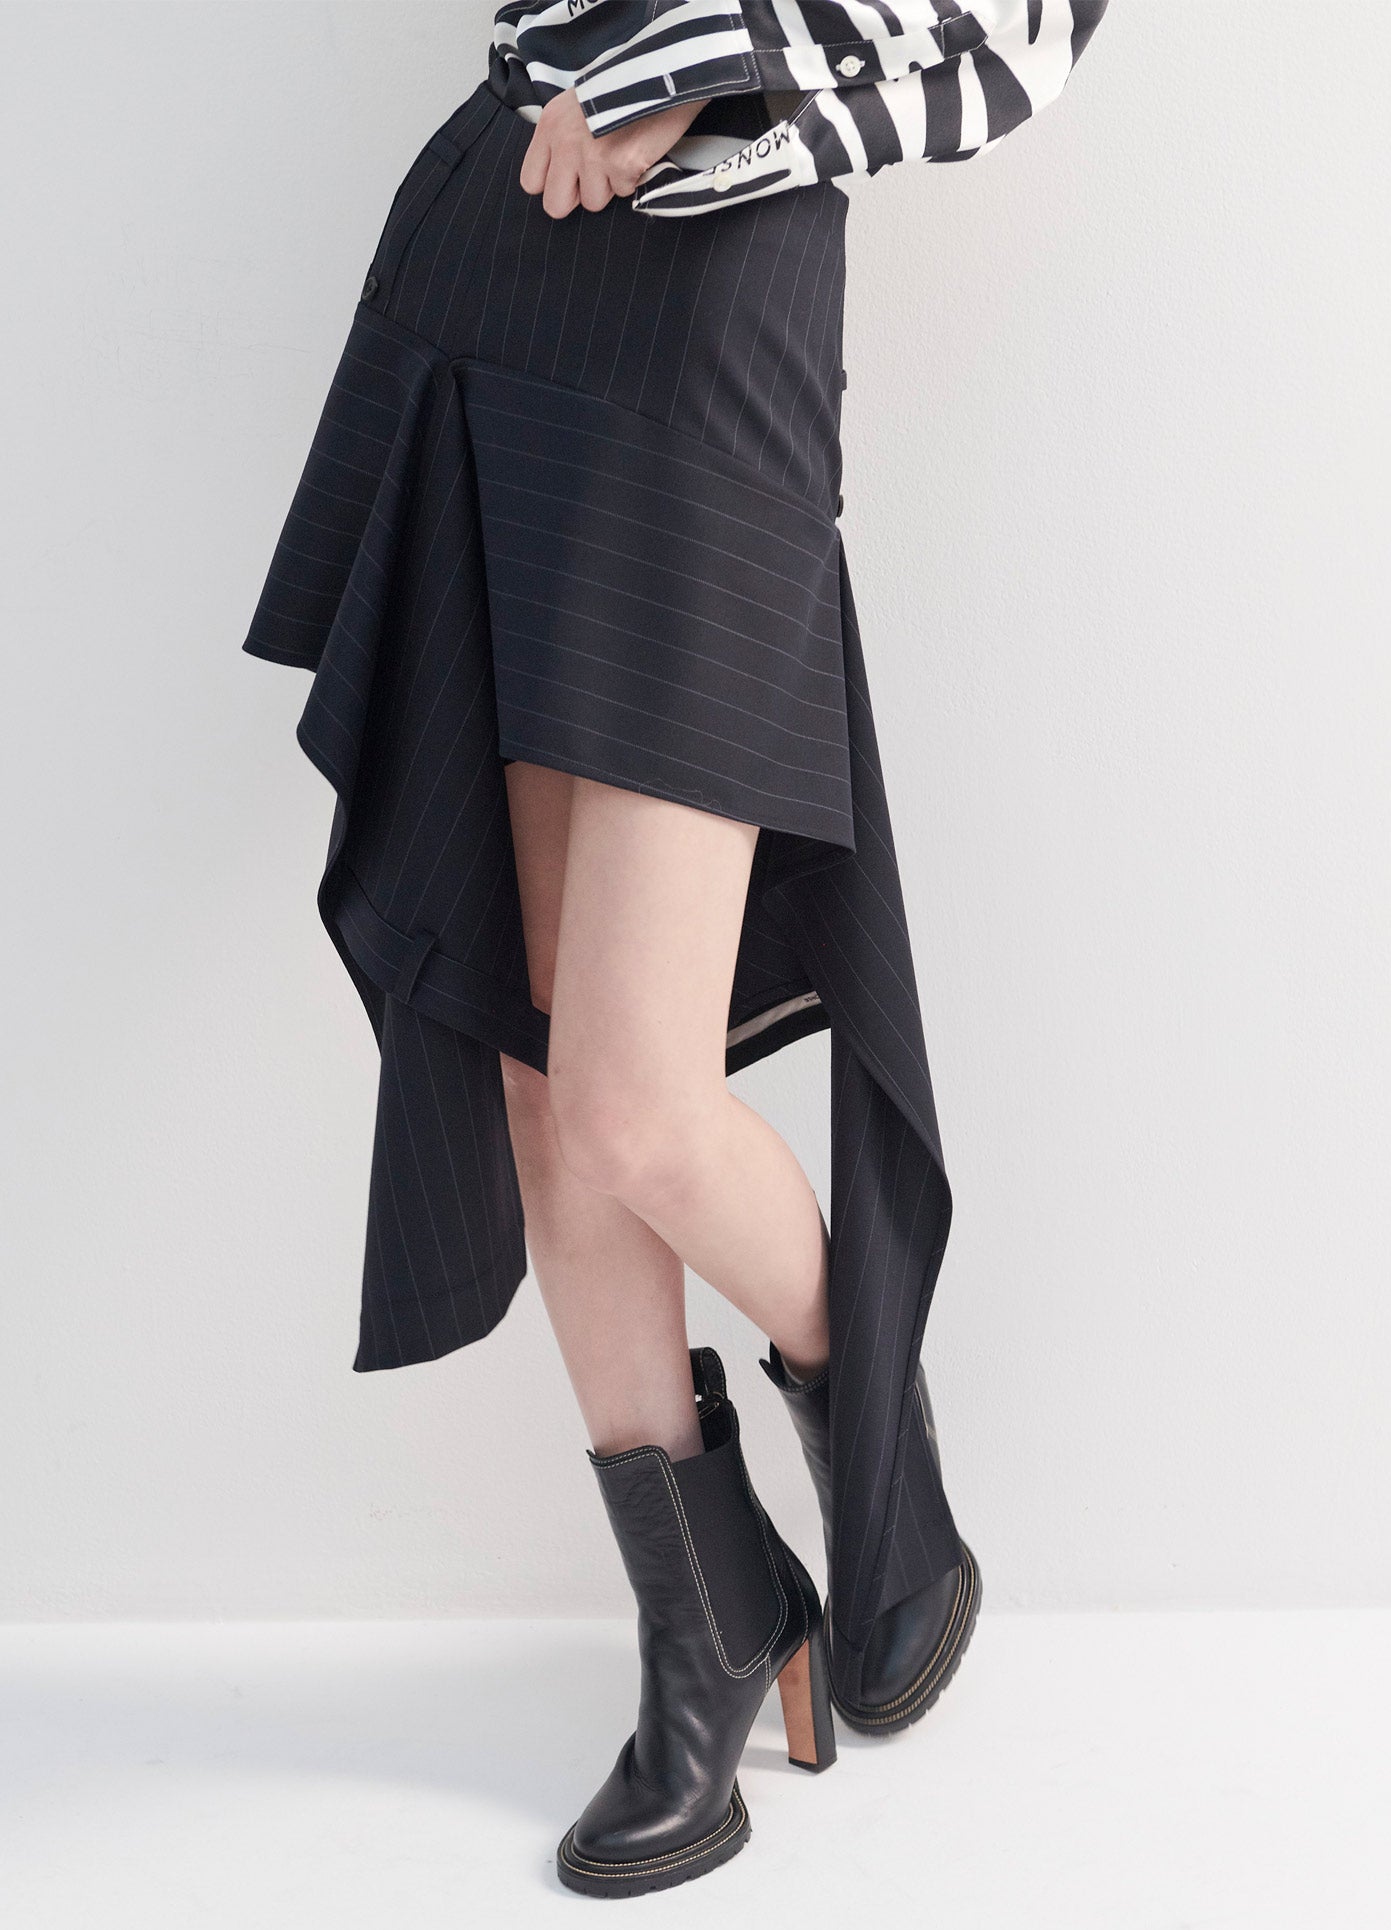 MONSE Deconstructed Trouser Skirt in Midnight on Model Front Detail View